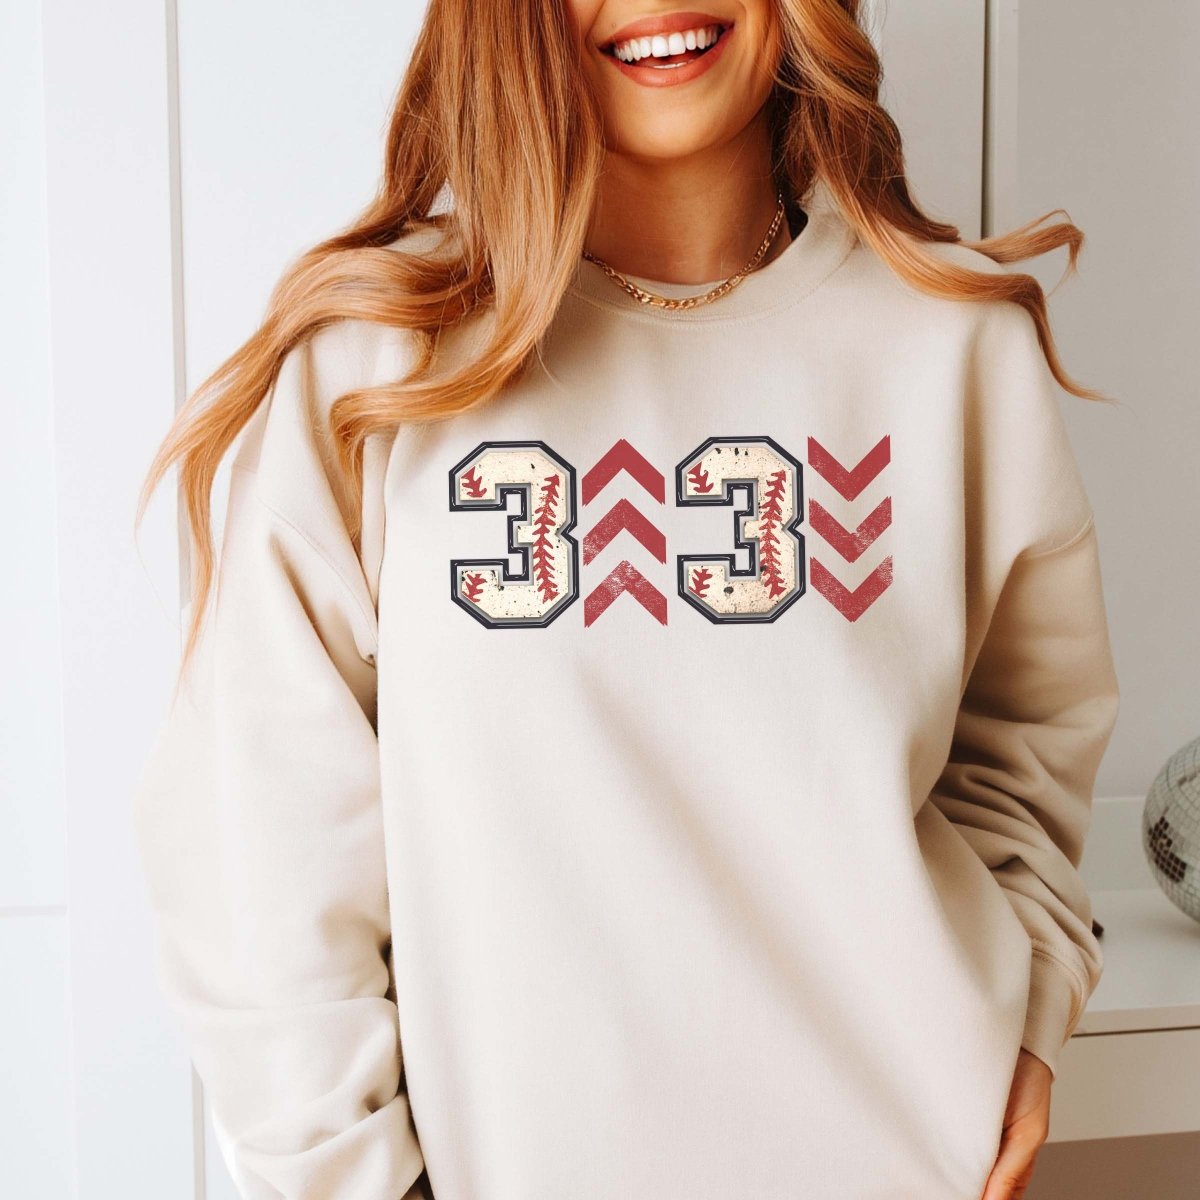 Get ready to cozy up in style with our "3 Up 3 Down" Sweatshirt, the perfect blend of comfort and cool for the modern mom on the move.